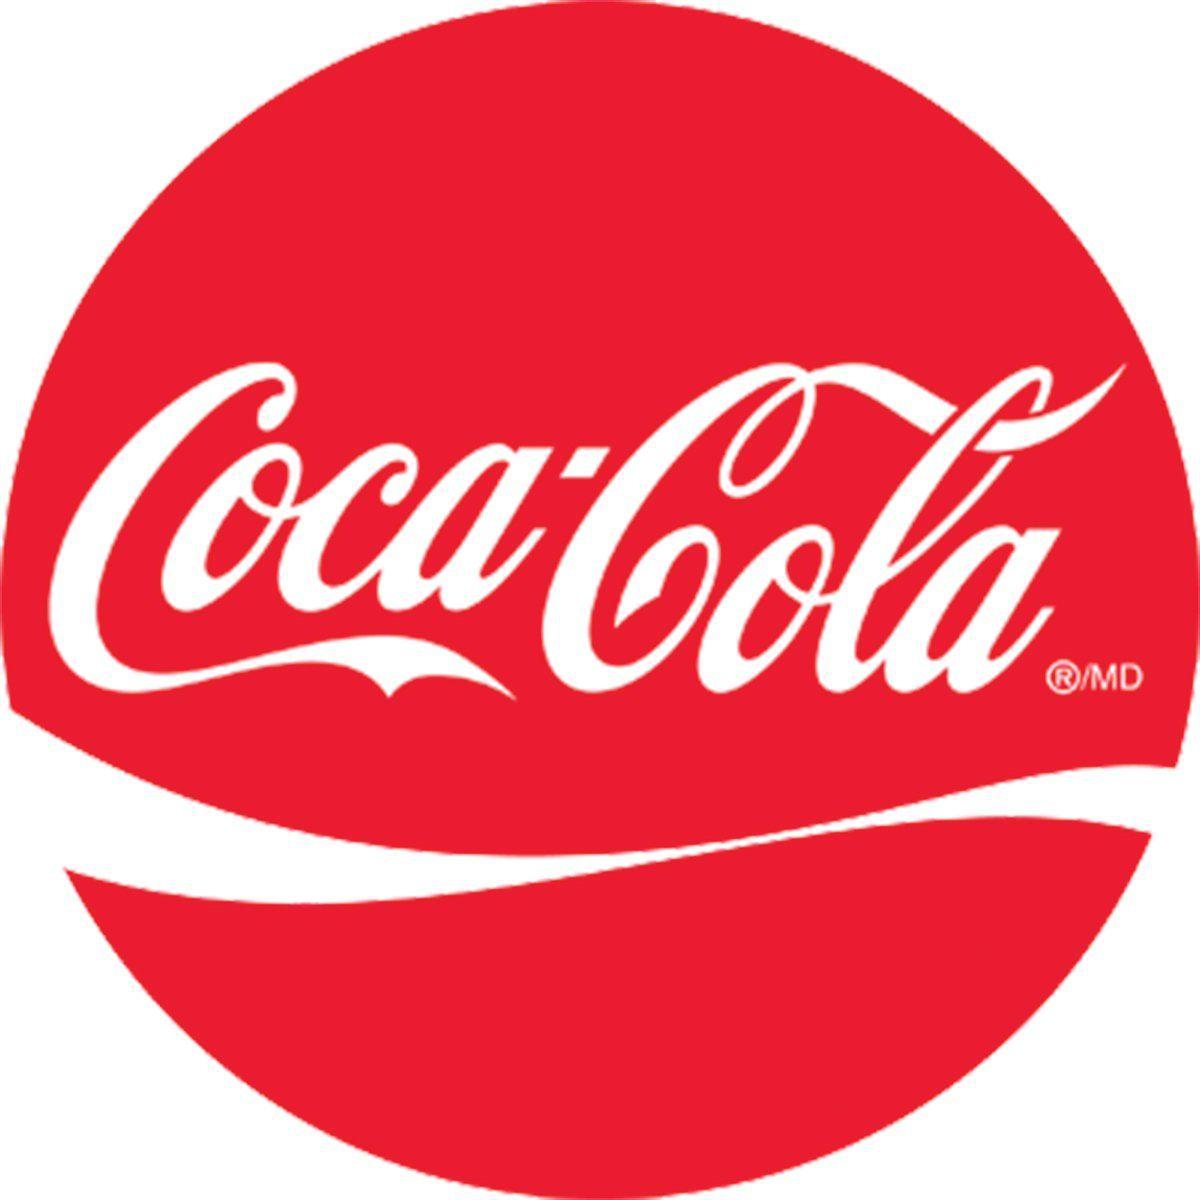 Popular Soda Brand Logo - You Like Your Logo, but Do Your Consumers?